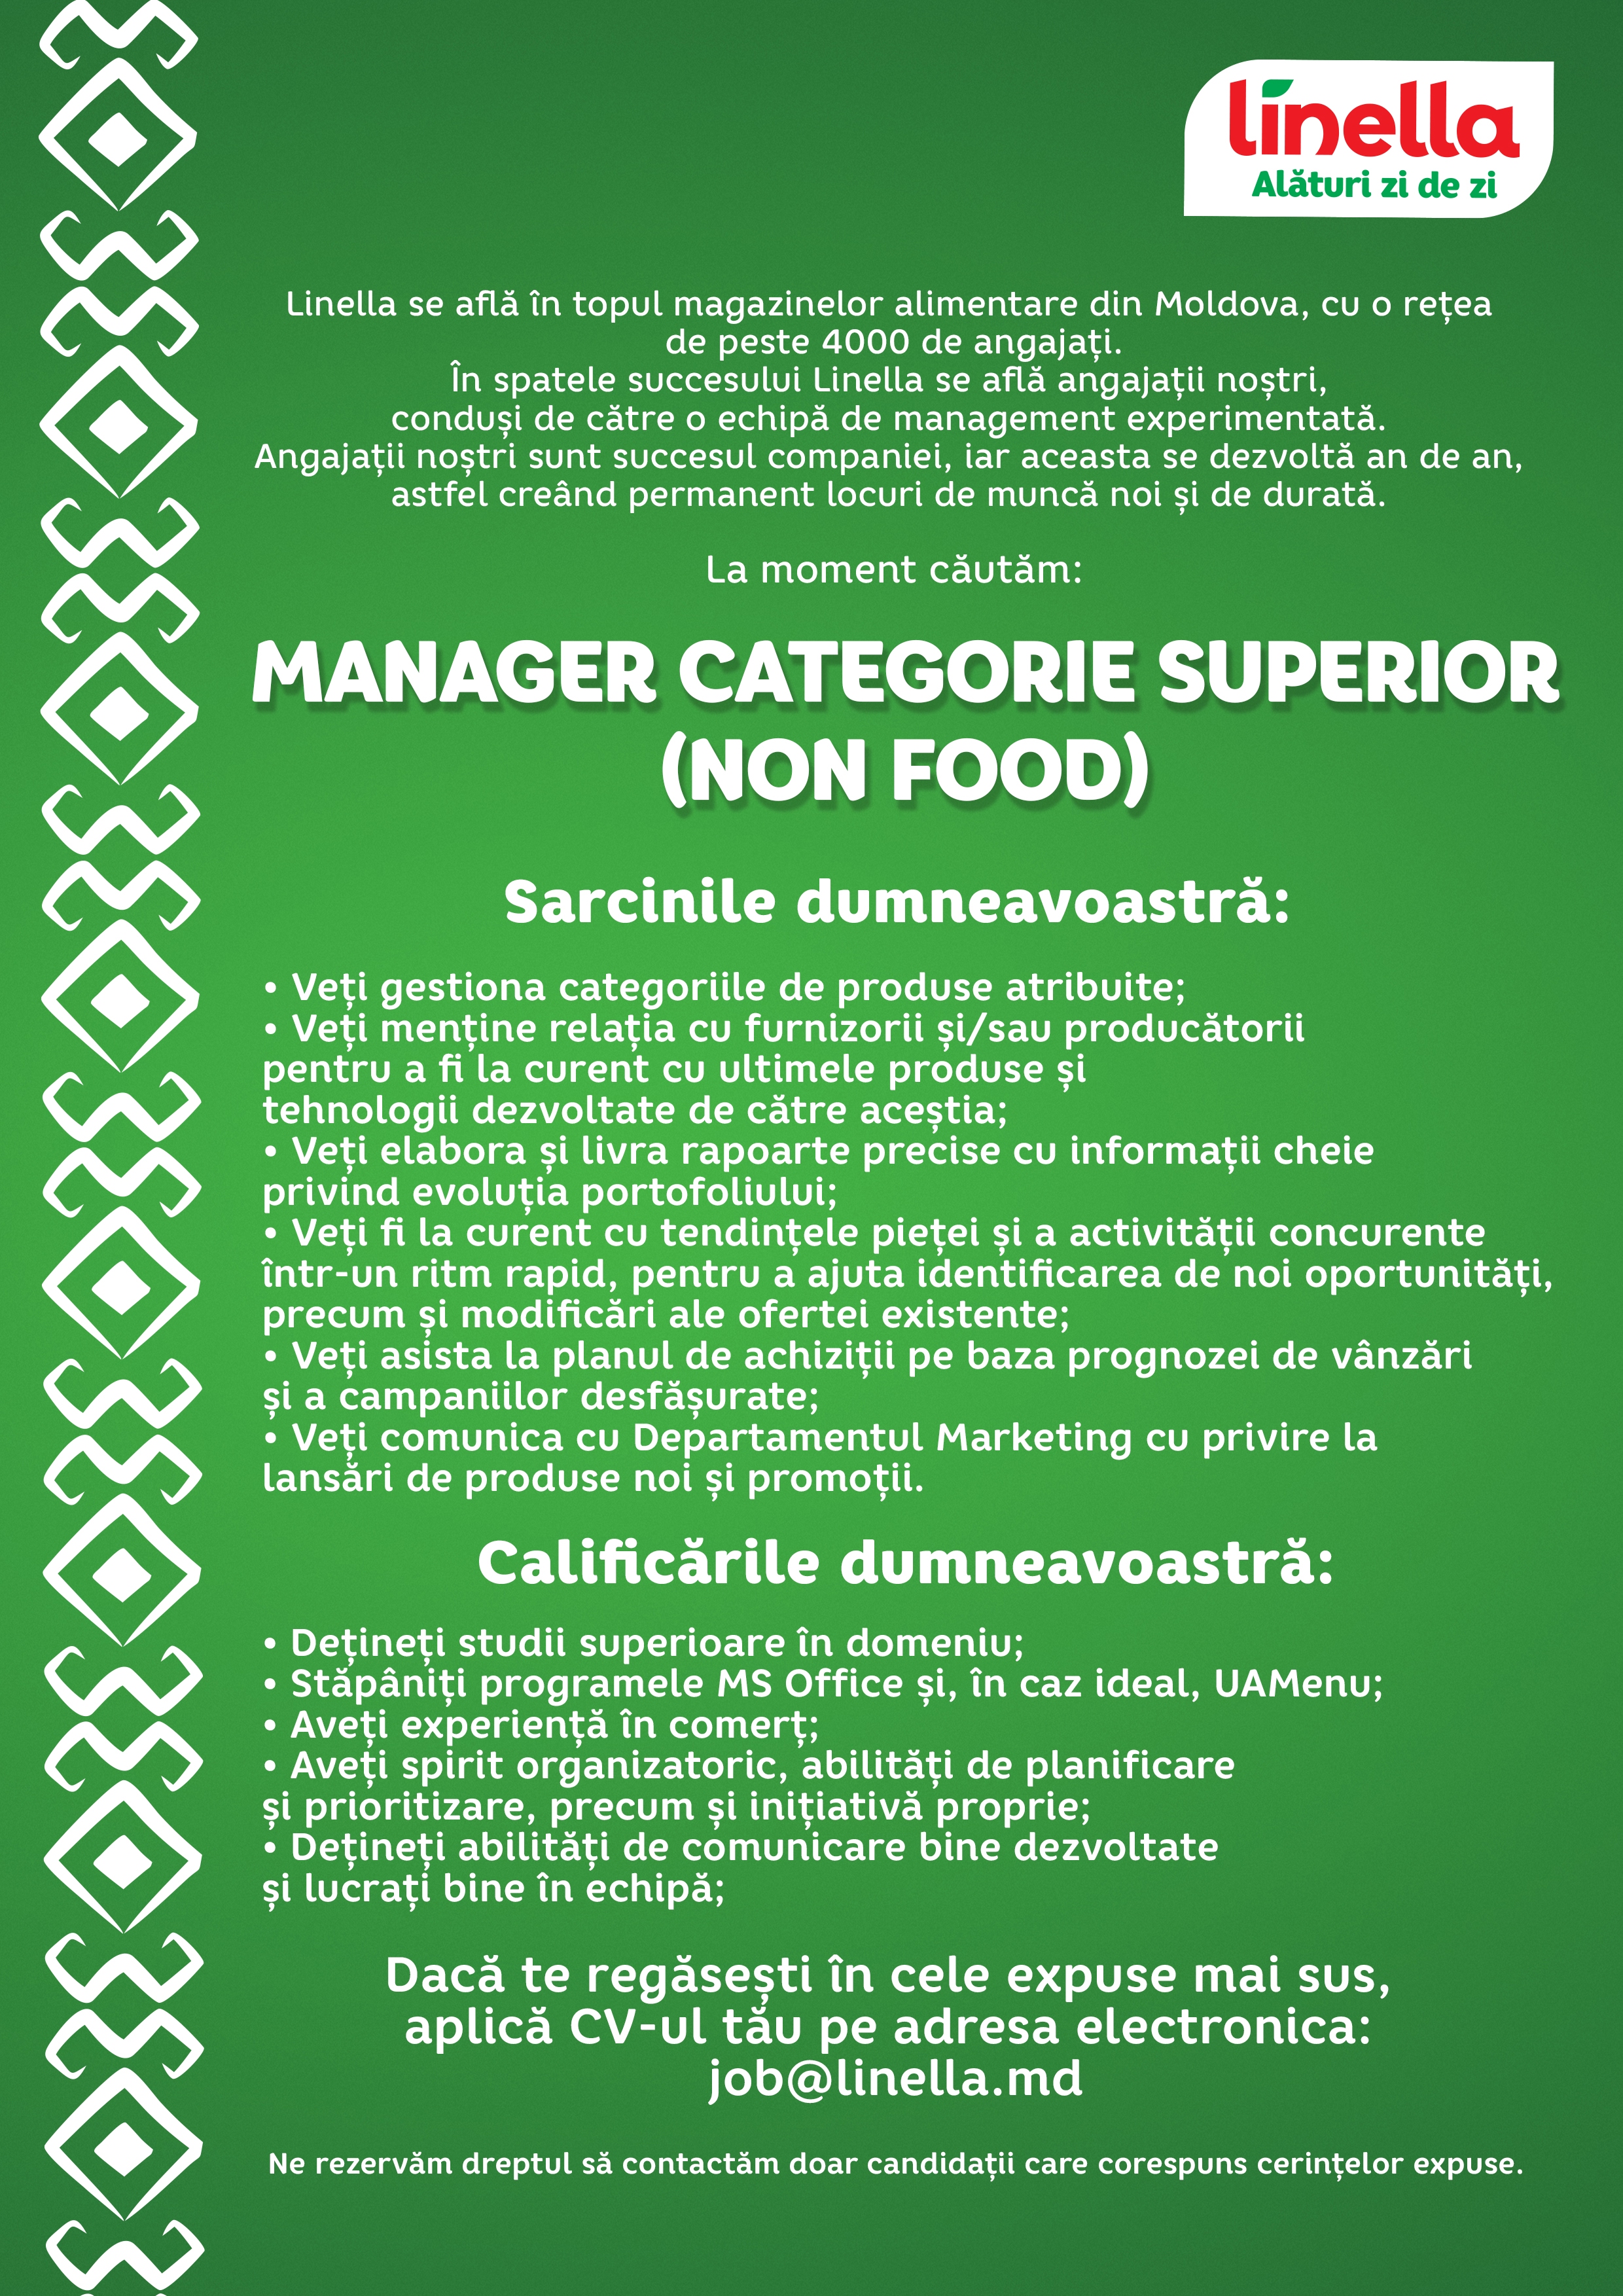 Manager Categorie Superior (Non Food)